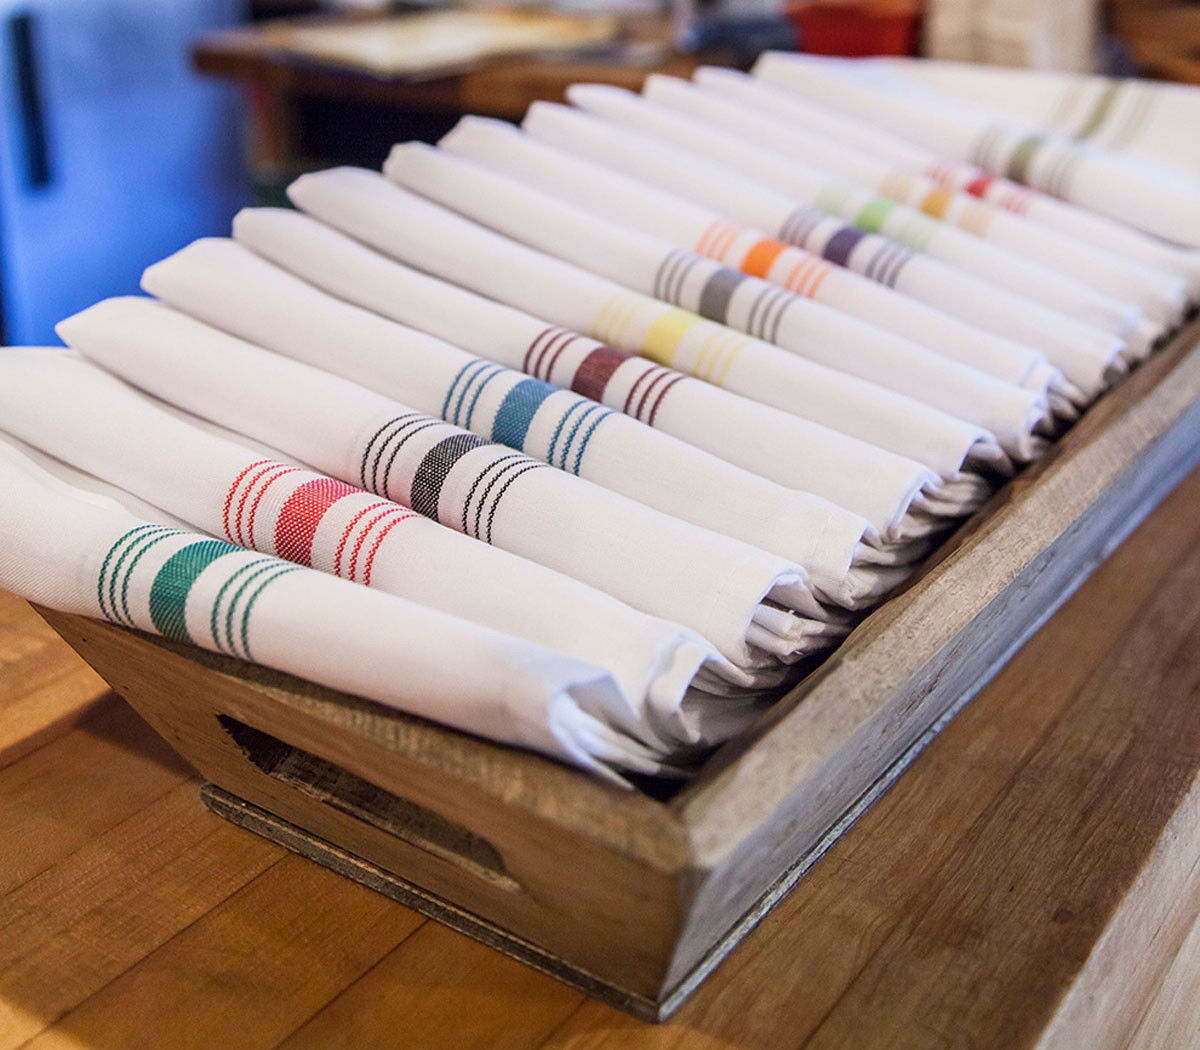 What are the selling quantities for Milliken Signature Stripe Bistro Napkins?